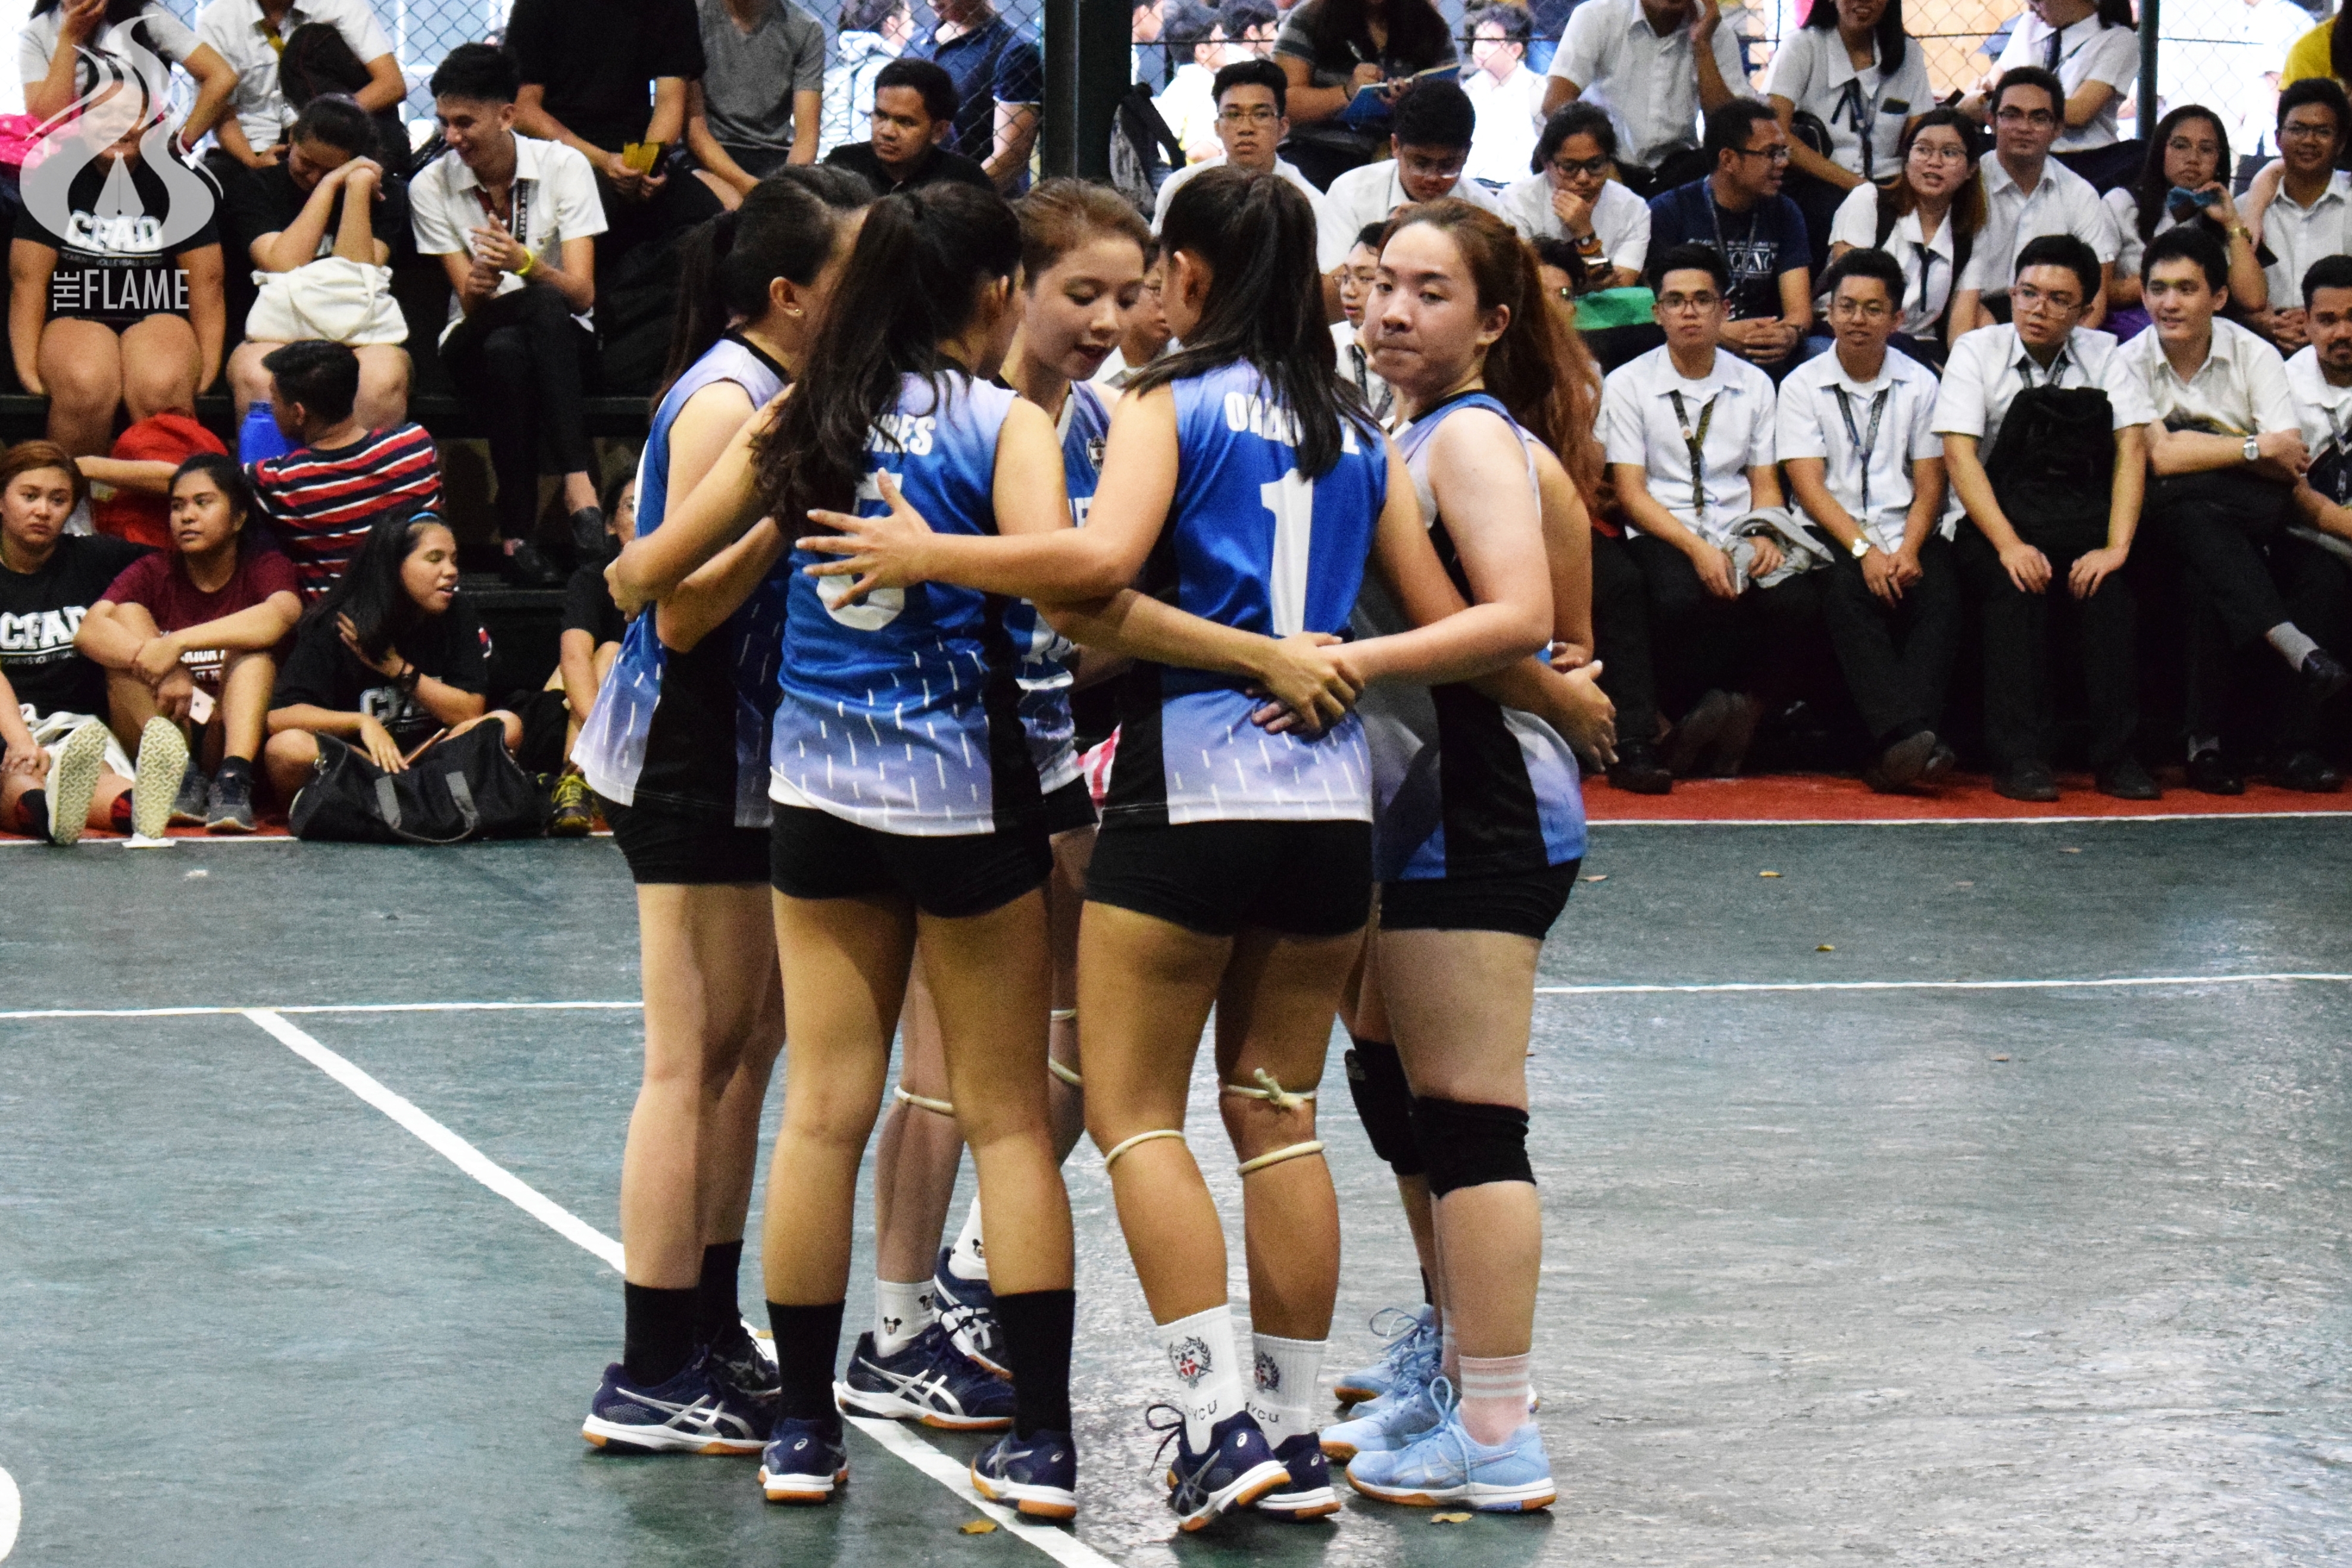 HS-B stuns AB Women’s in opening match